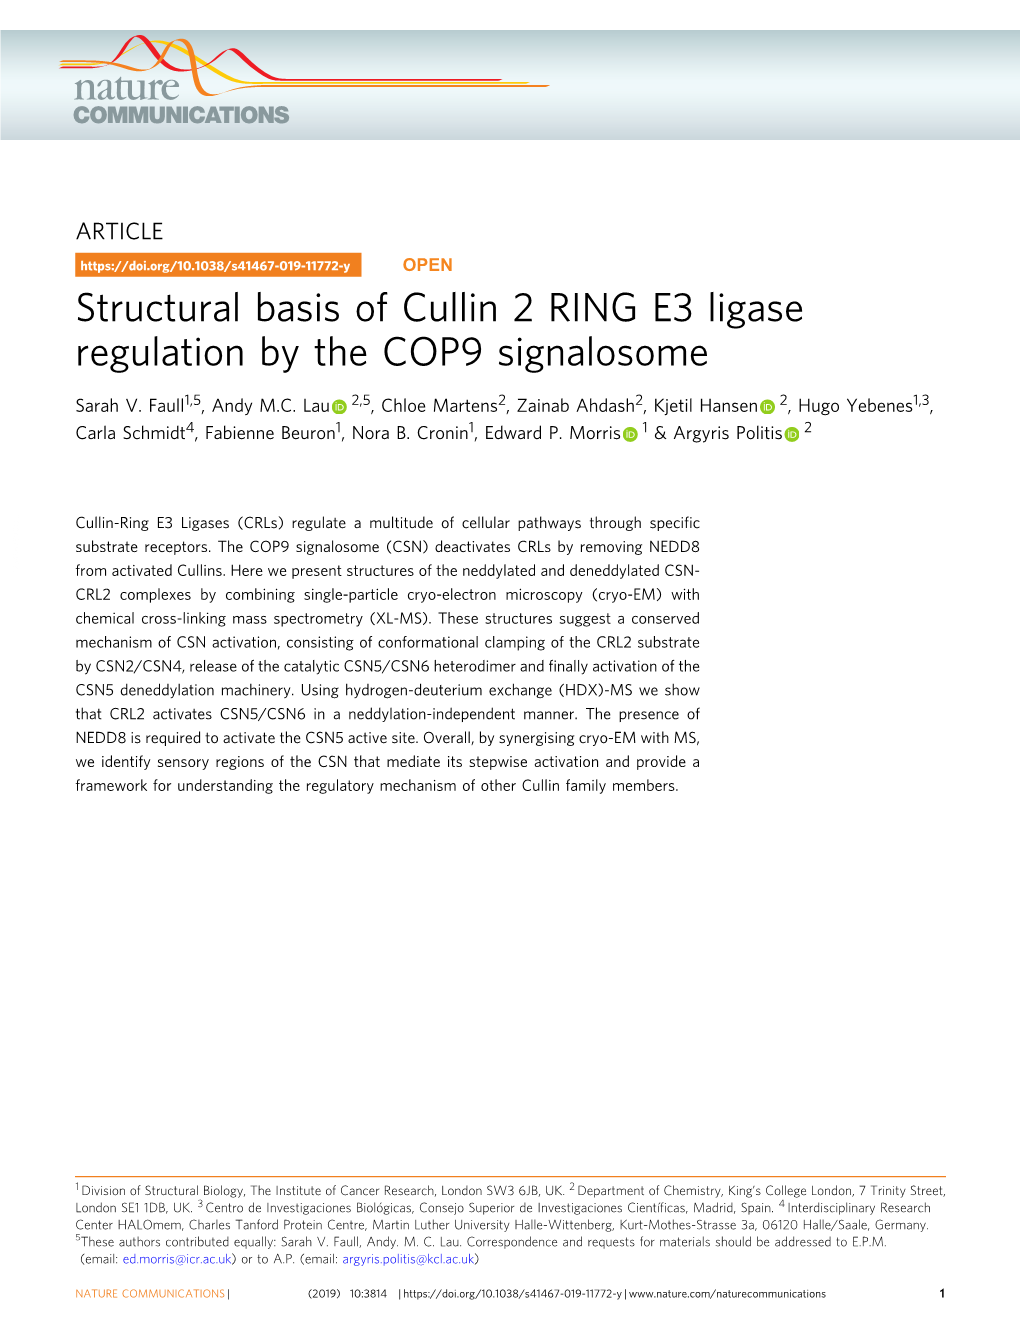 Structural Basis of Cullin 2 RING E3 Ligase Regulation by the COP9 Signalosome